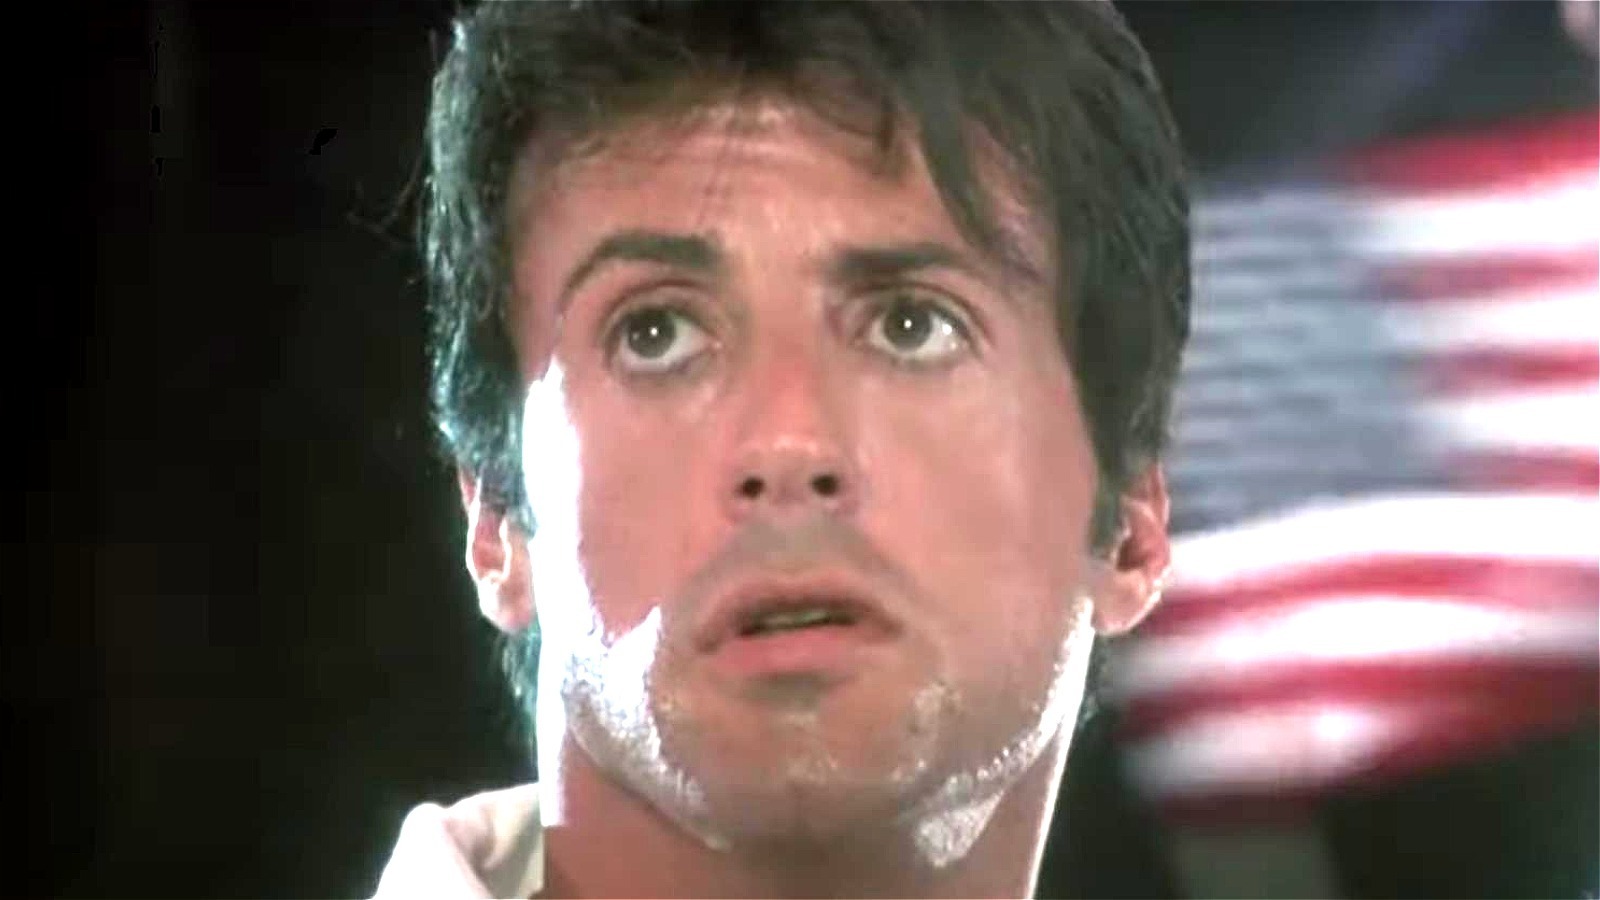 Get Your First Look At The Rocky 4 Director's Cut In A New Clip